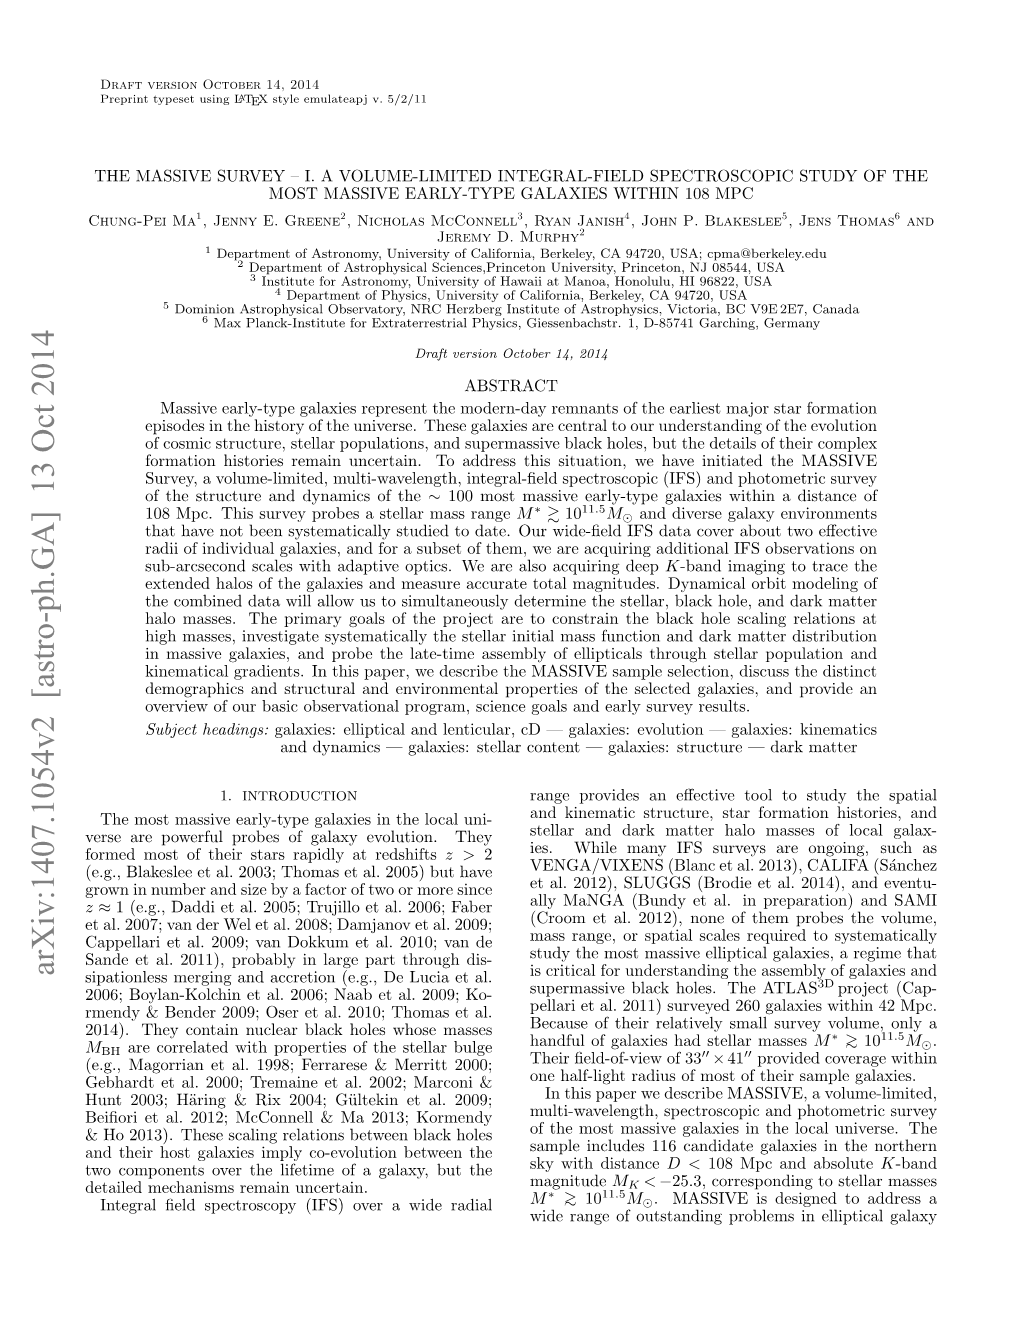 Arxiv:1407.1054V2 [Astro-Ph.GA] 13 Oct 2014 Is Critical for Understanding the Assembly of Galaxies and Sipationless Merging and Accretion (E.G., De Lucia Et Al